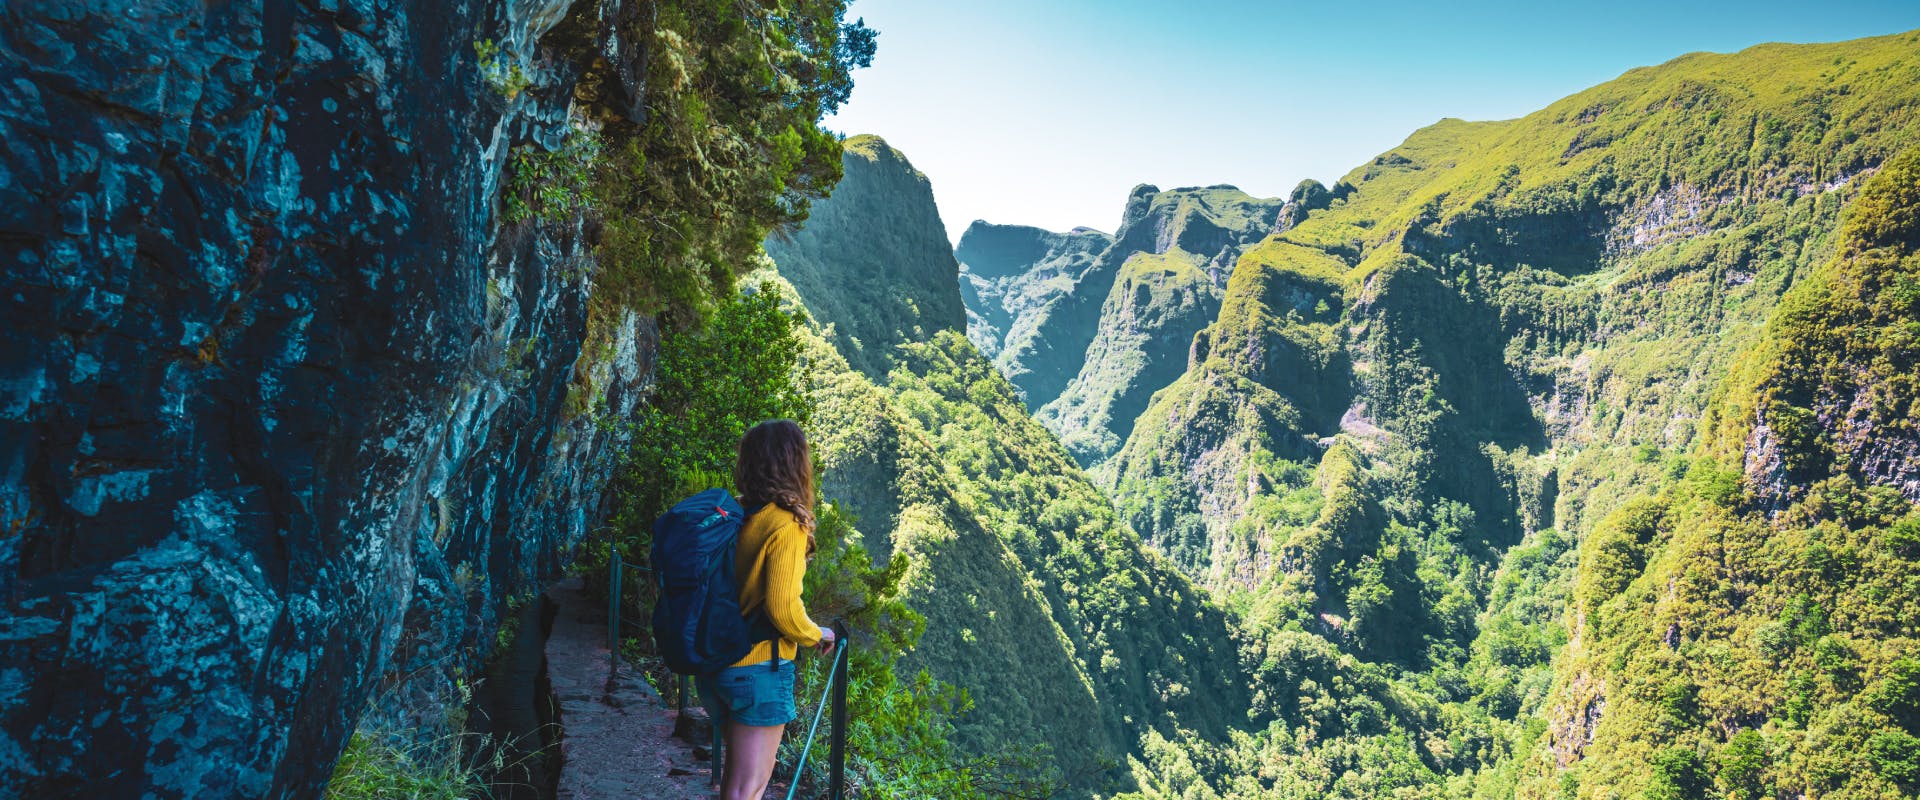 A woman hiking in Portugal.